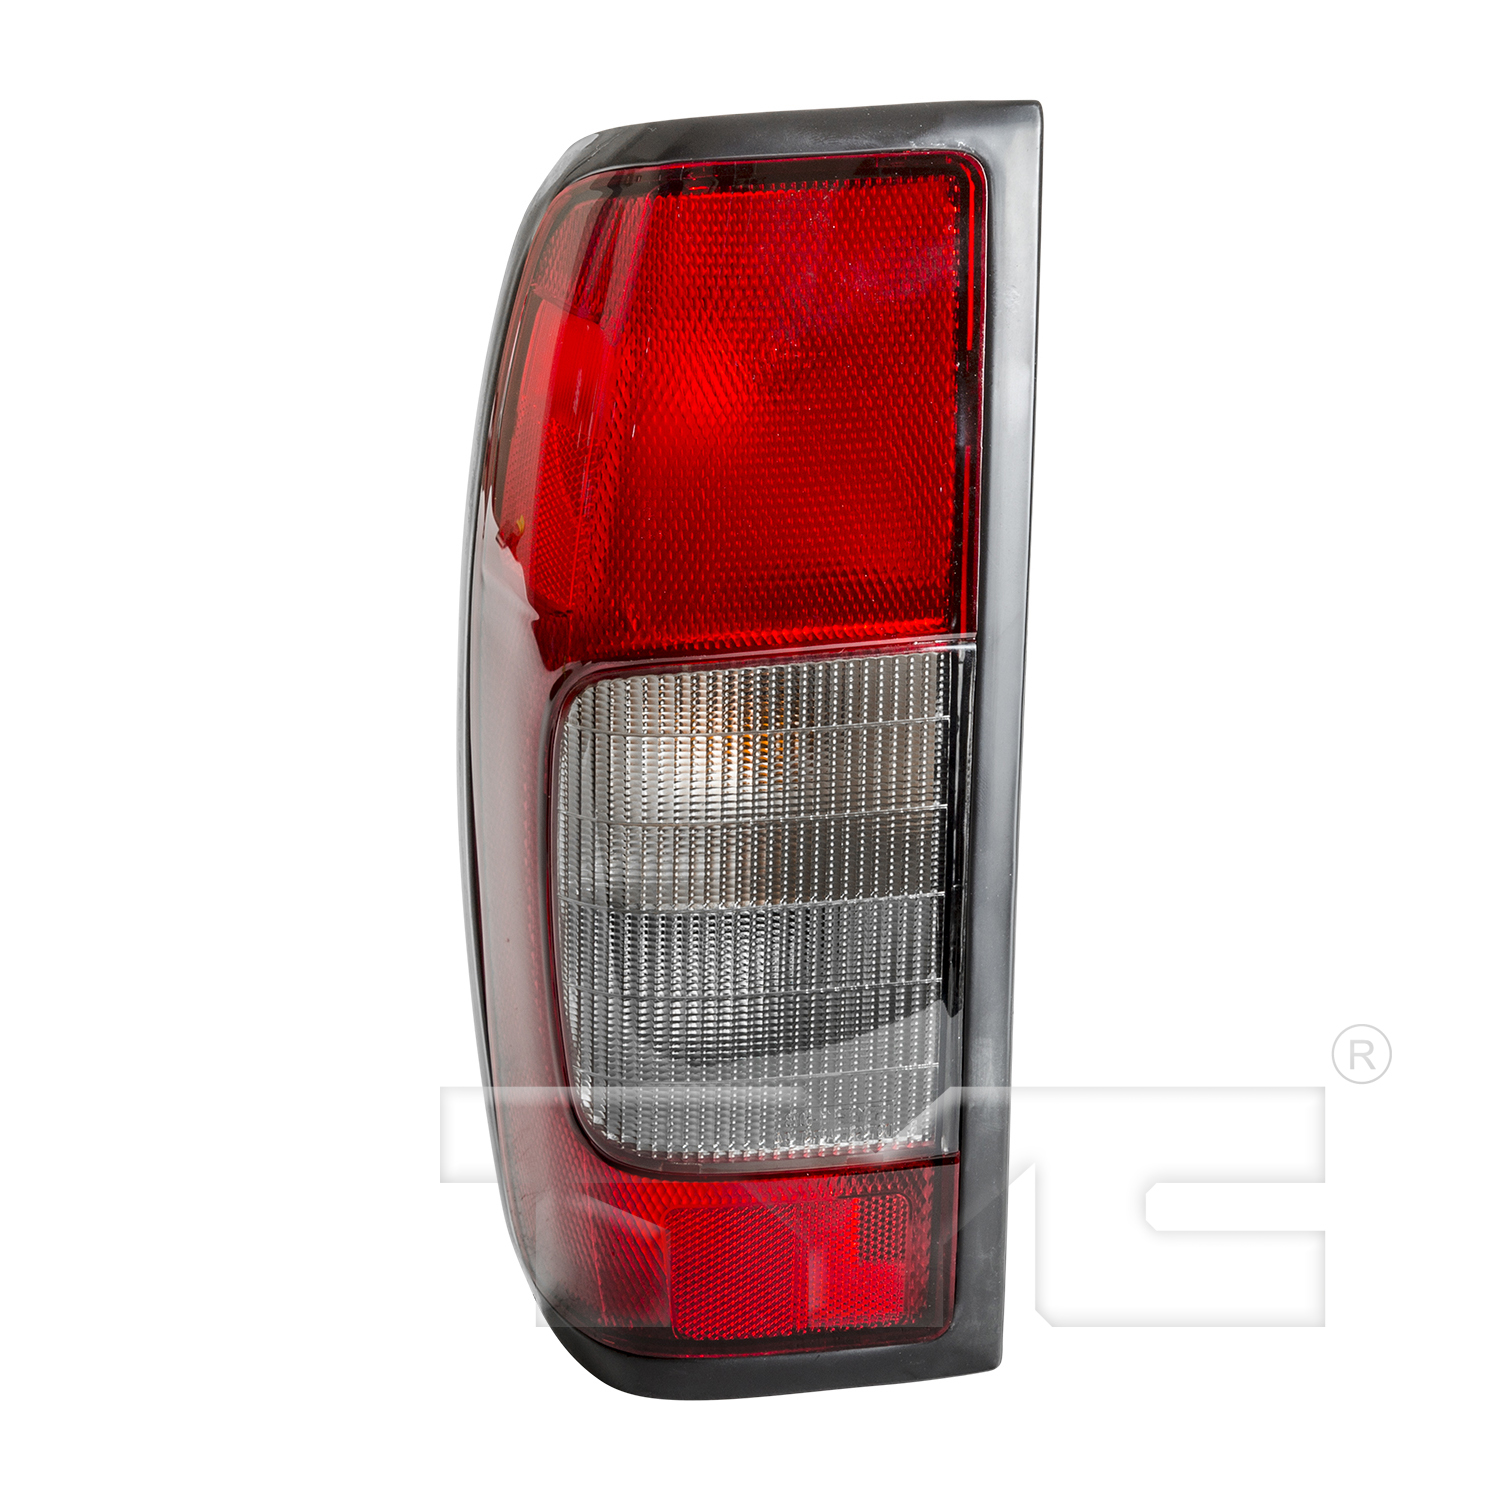 Aftermarket TAILLIGHTS for NISSAN - FRONTIER, FRONTIER,00-00,LT Taillamp assy